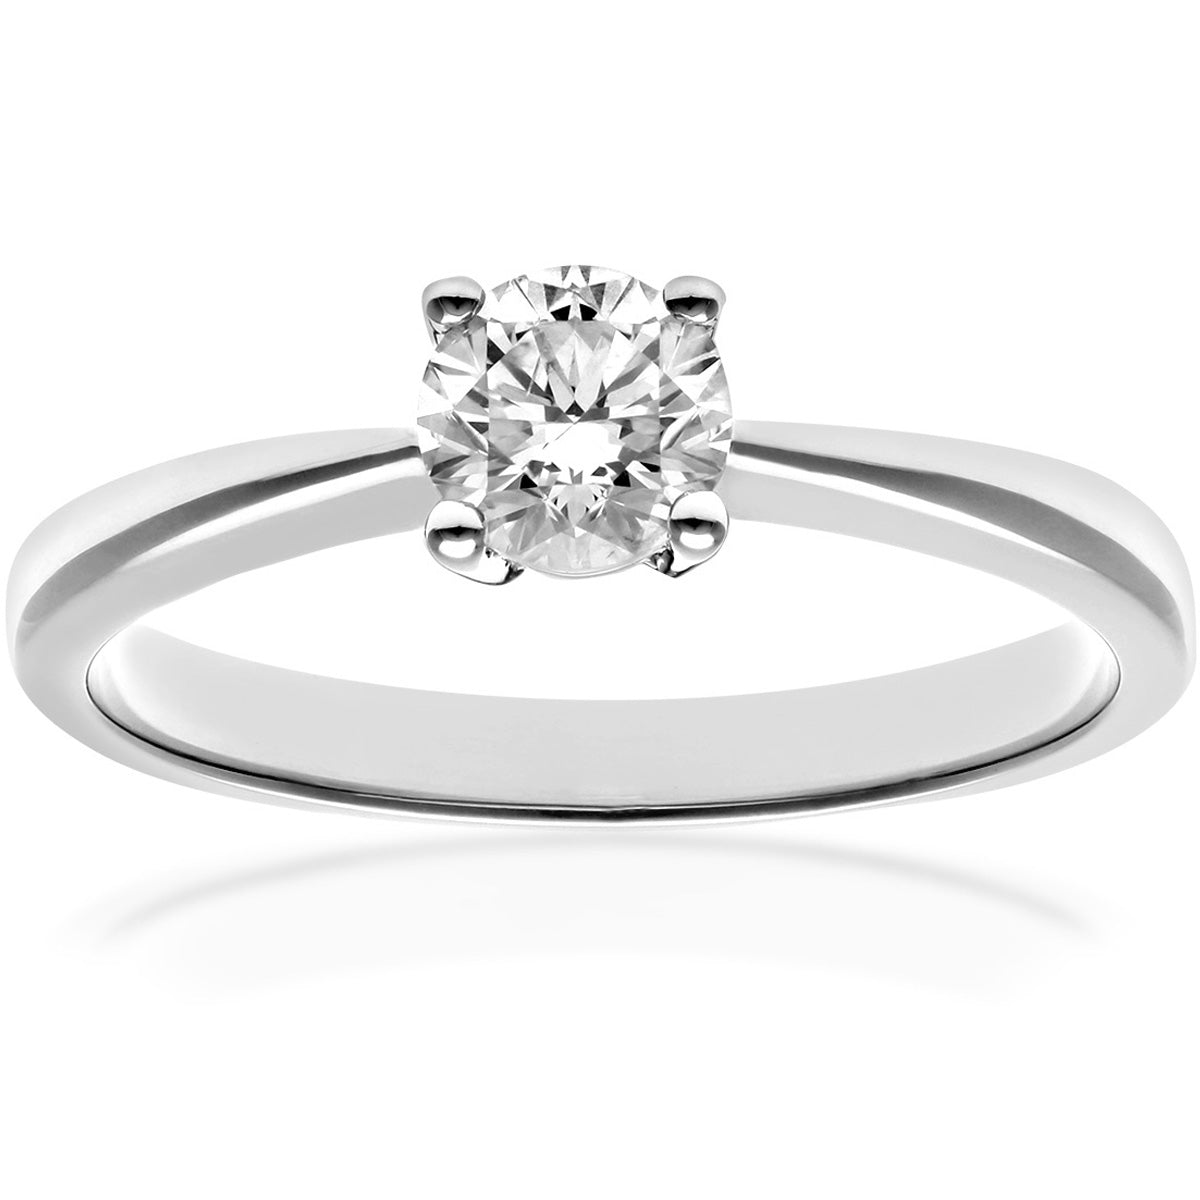 18ct White Gold  1/2ct Diamond 4 Claw Solitaire Engagement Ring - PR0AXL4307W18HSI